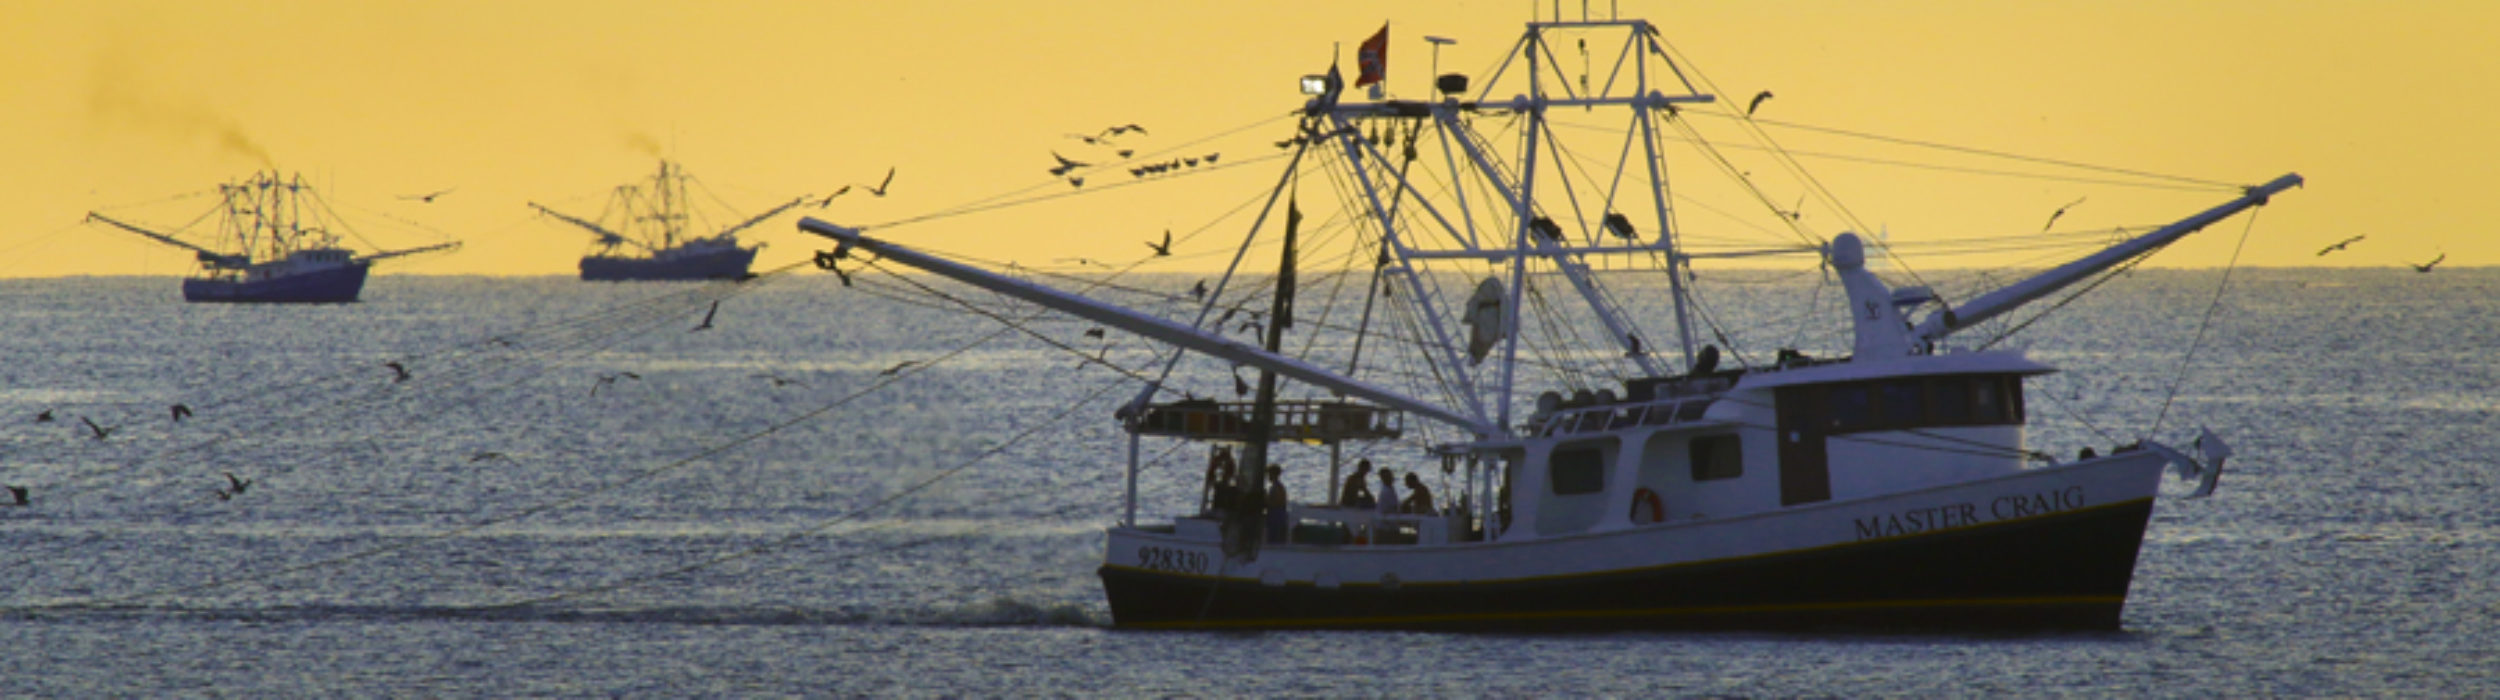 Gulf Seafood Foundation – "Voice of the Gulf"